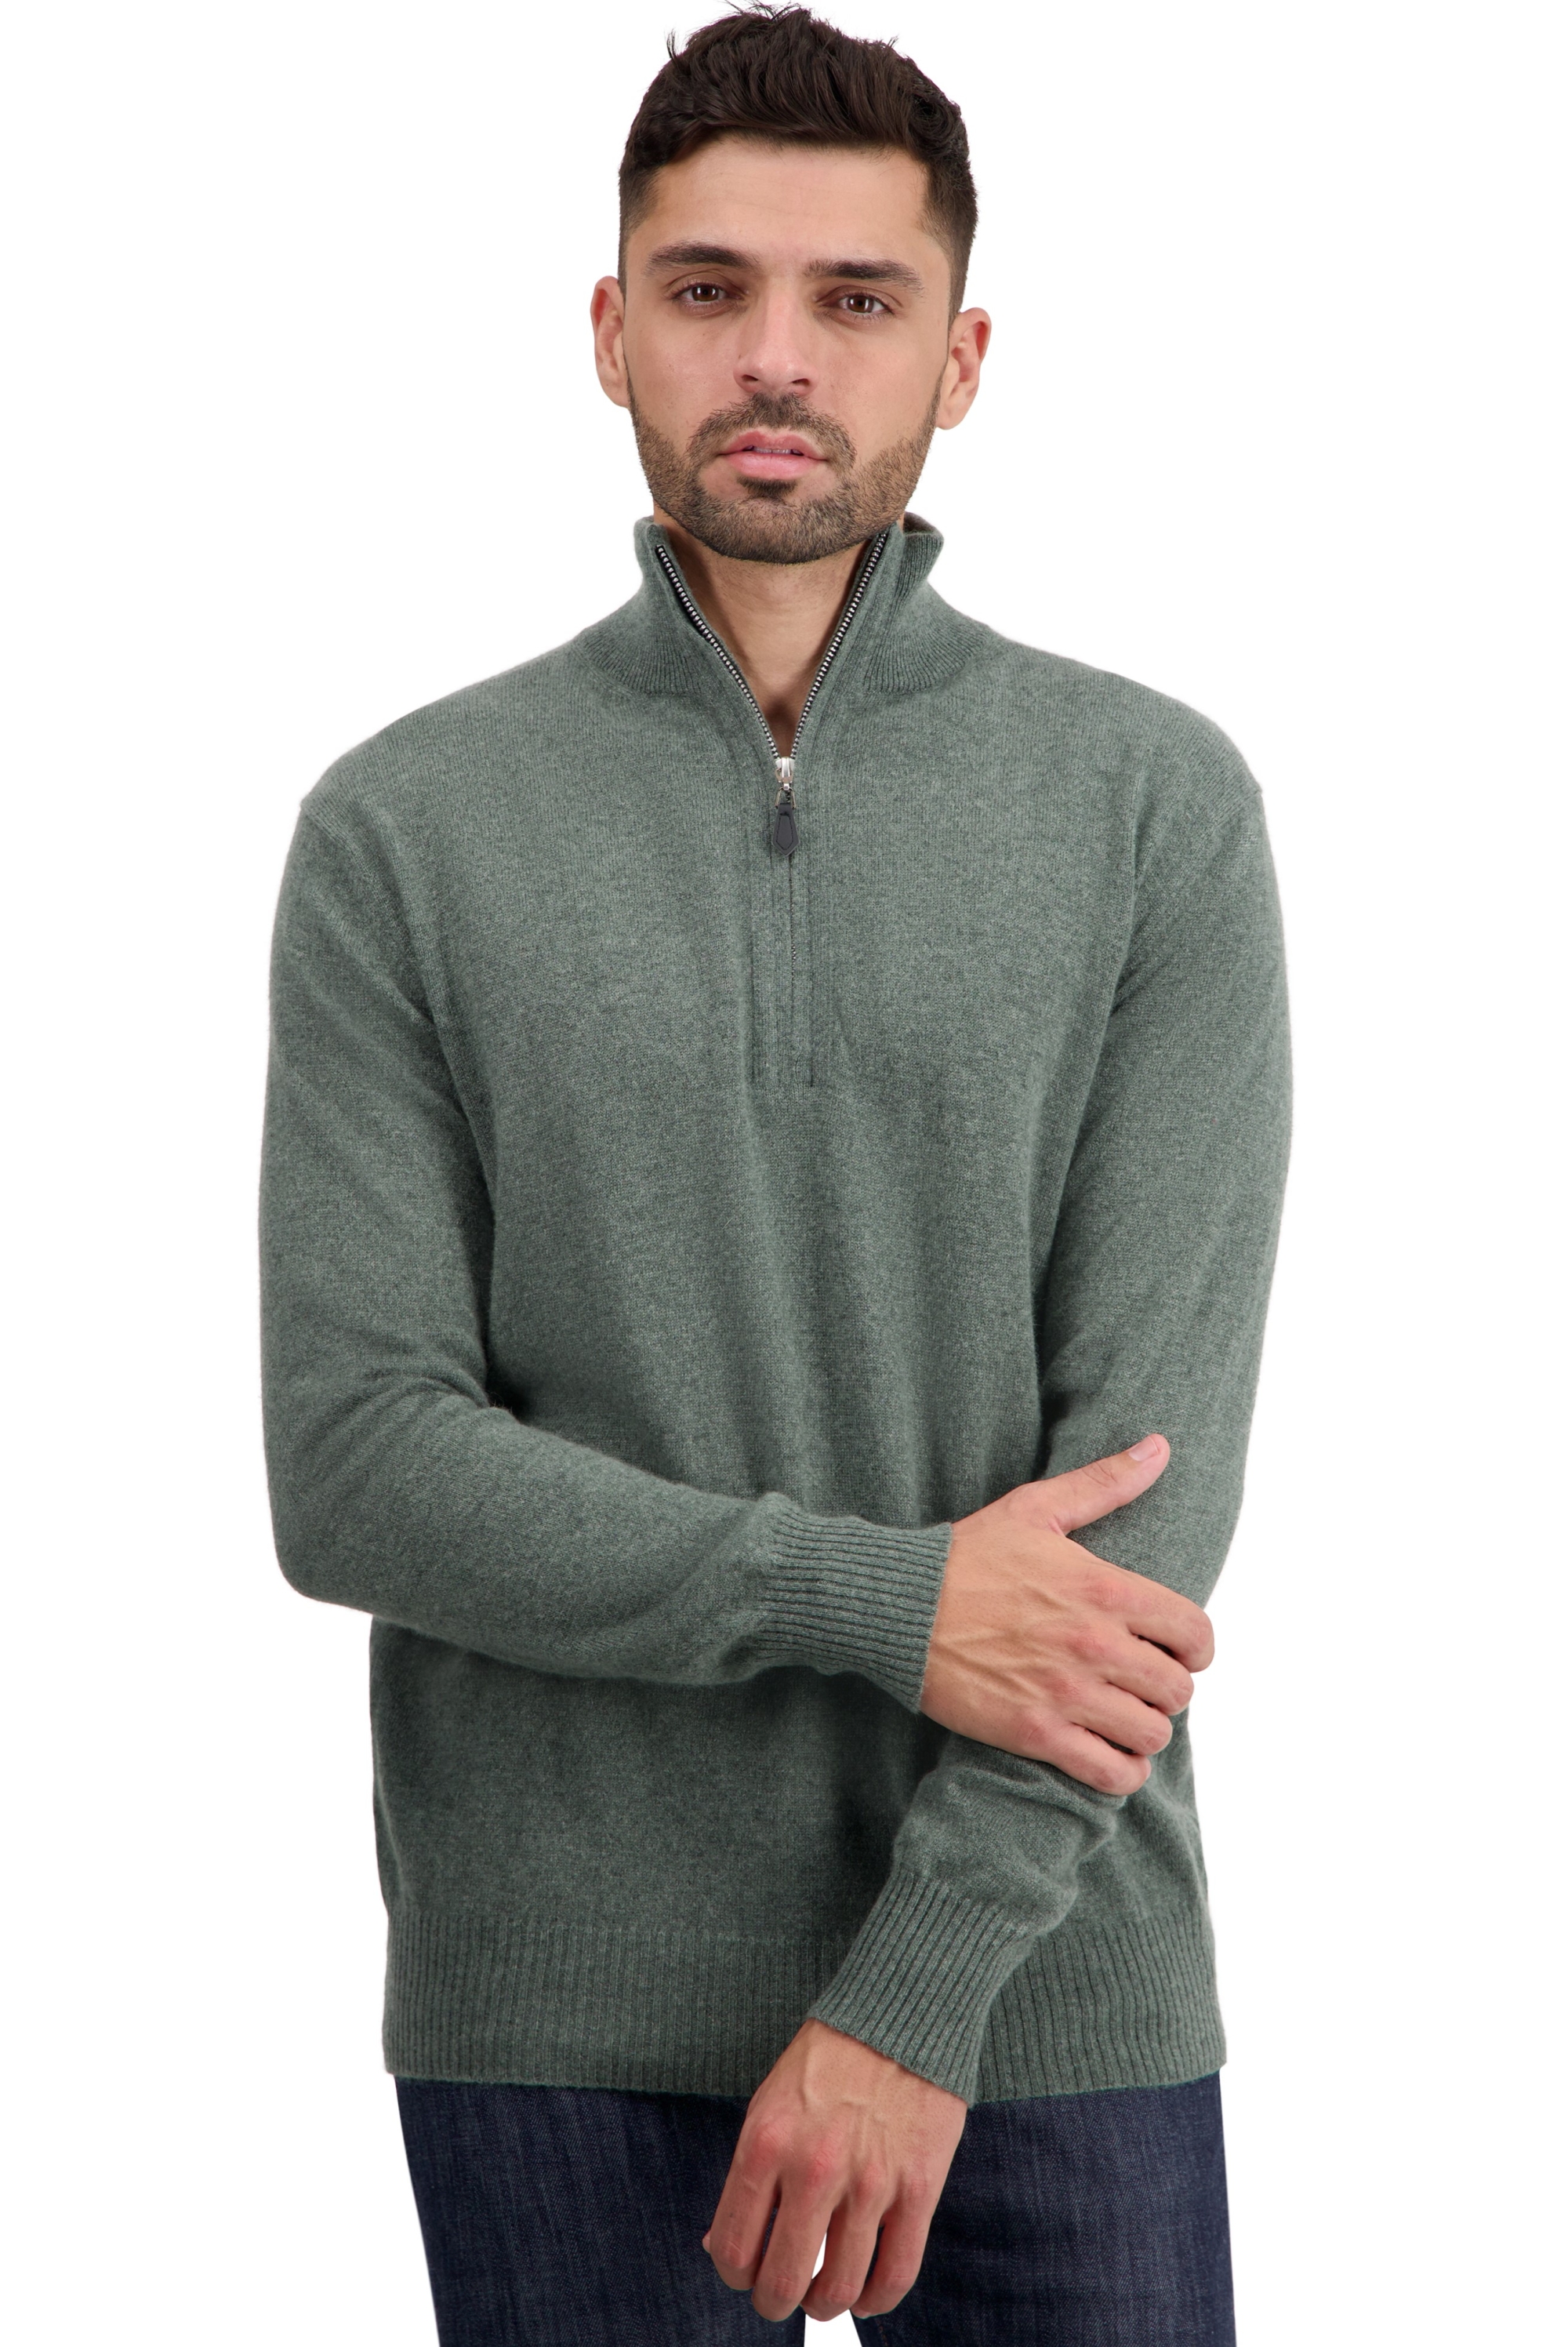 Cachemire pull homme toulon first military green m